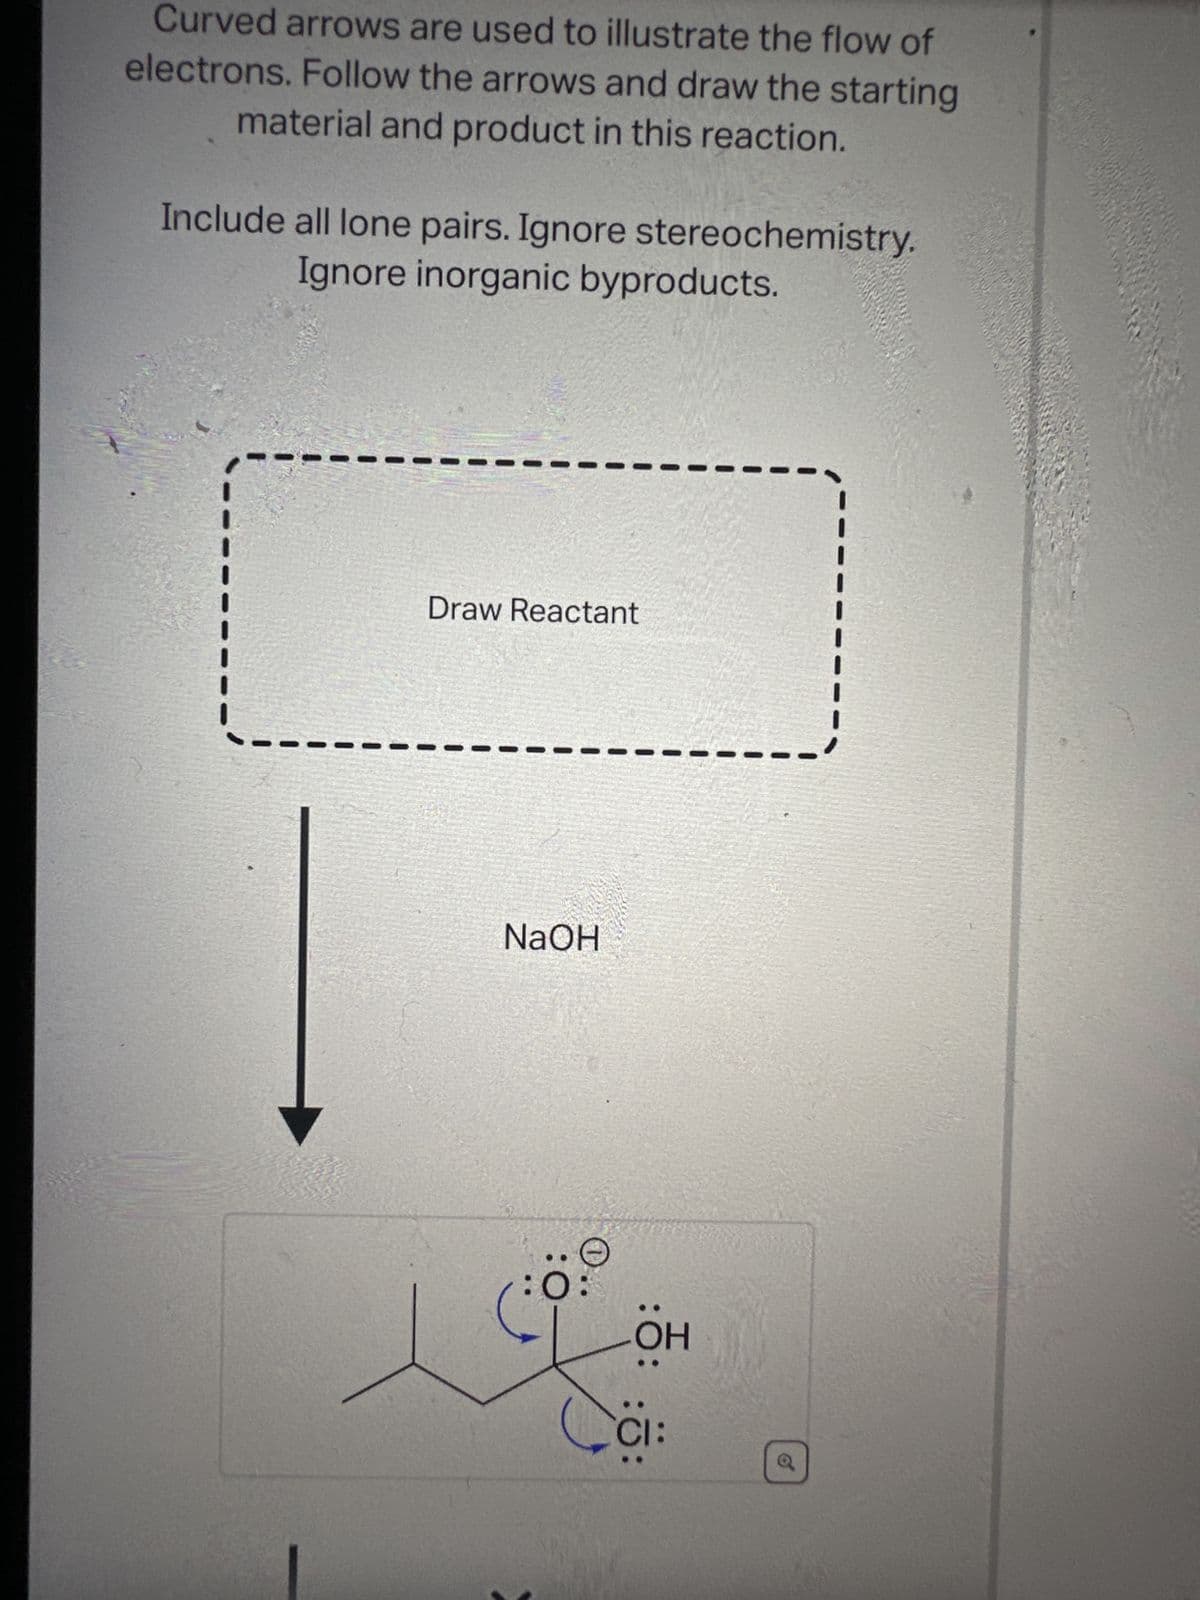 Curved arrows are used to illustrate the flow of
electrons. Follow the arrows and draw the starting
material and product in this reaction.
Include all lone pairs. Ignore stereochemistry.
Ignore inorganic byproducts.
Draw Reactant
NaOH
:0
OH
CI:
o